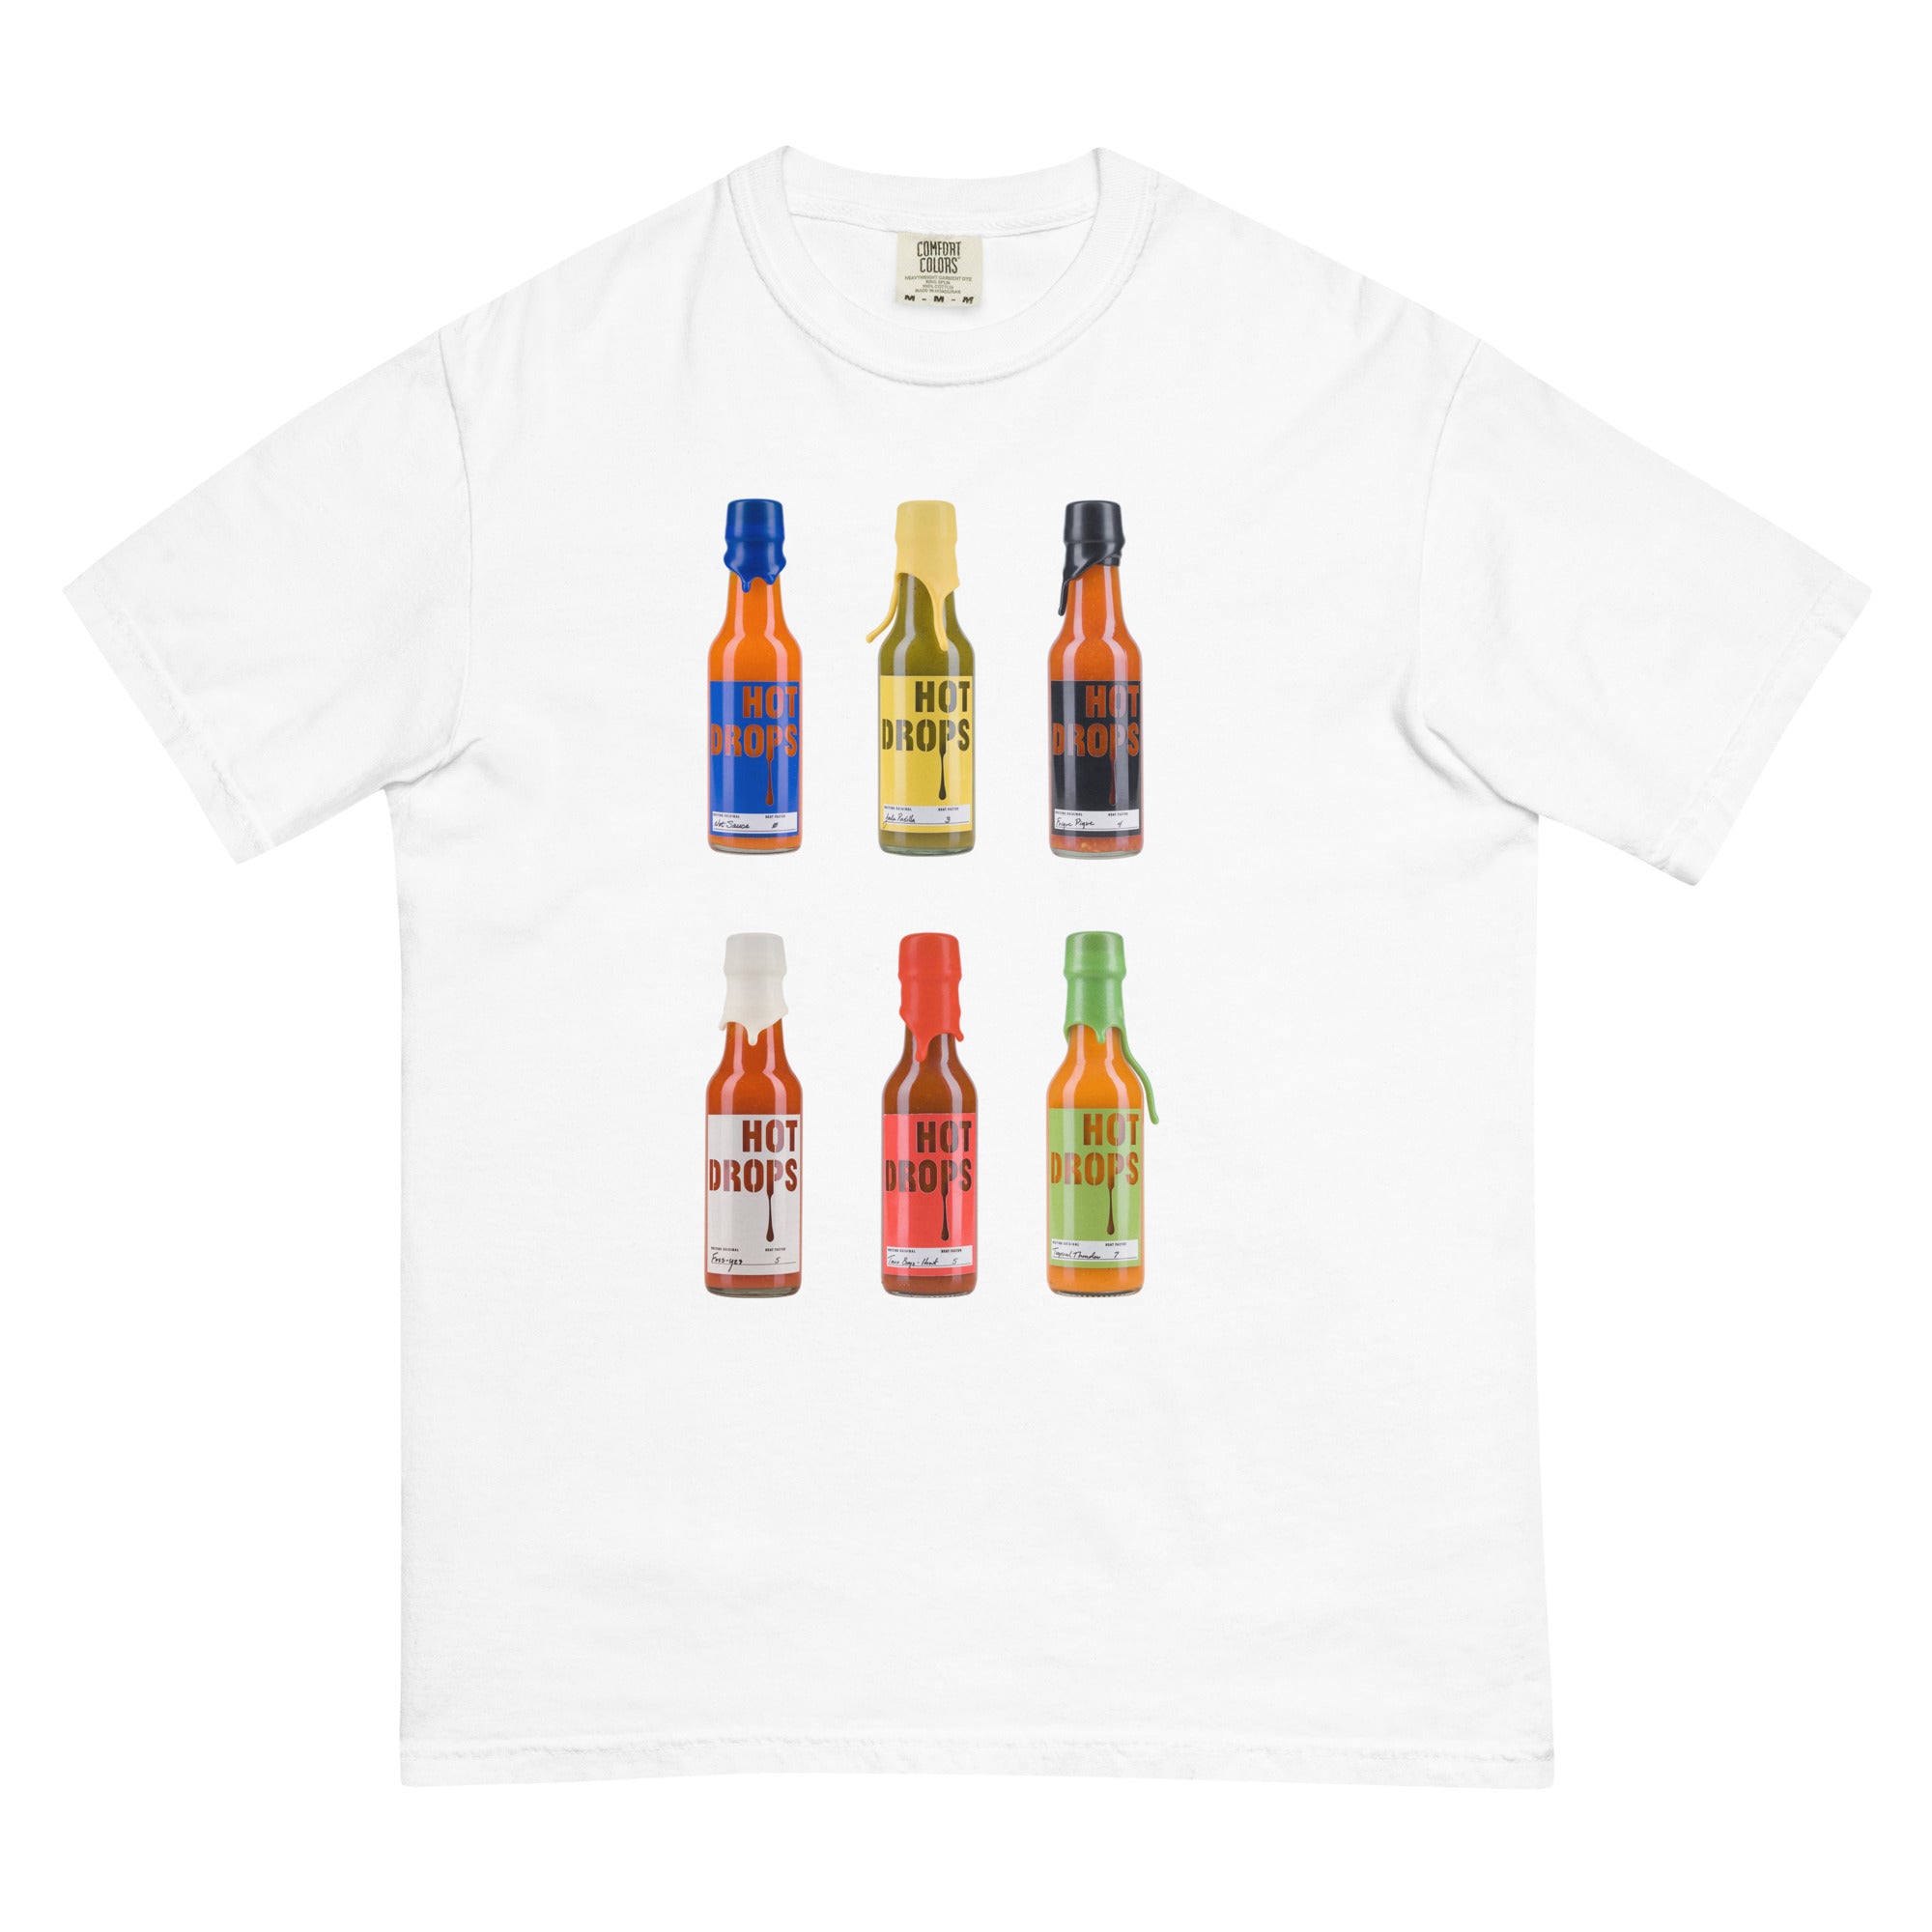 The Line-up Tee